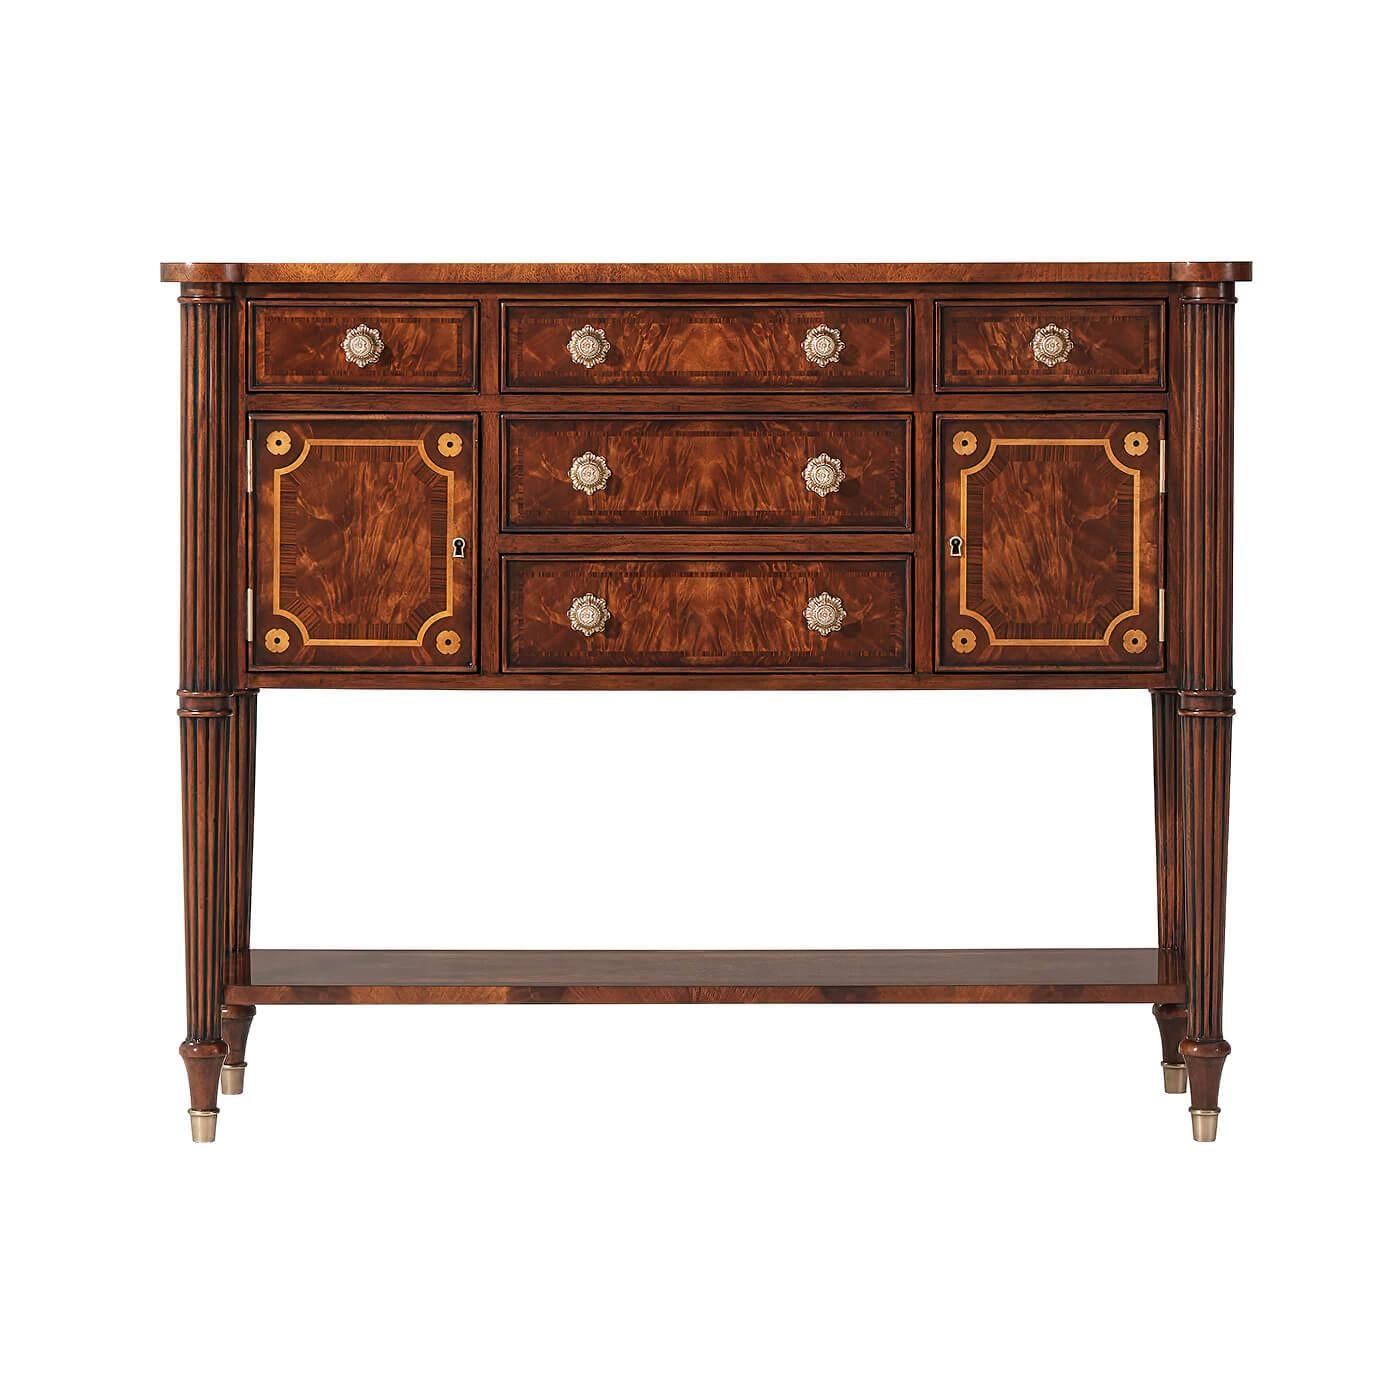 An English Regency style flame mahogany and rosewood banded sideboard, with five drawers and two cabinet doors, on turned and reeded legs joined by an under tier. 

Dimensions: 42